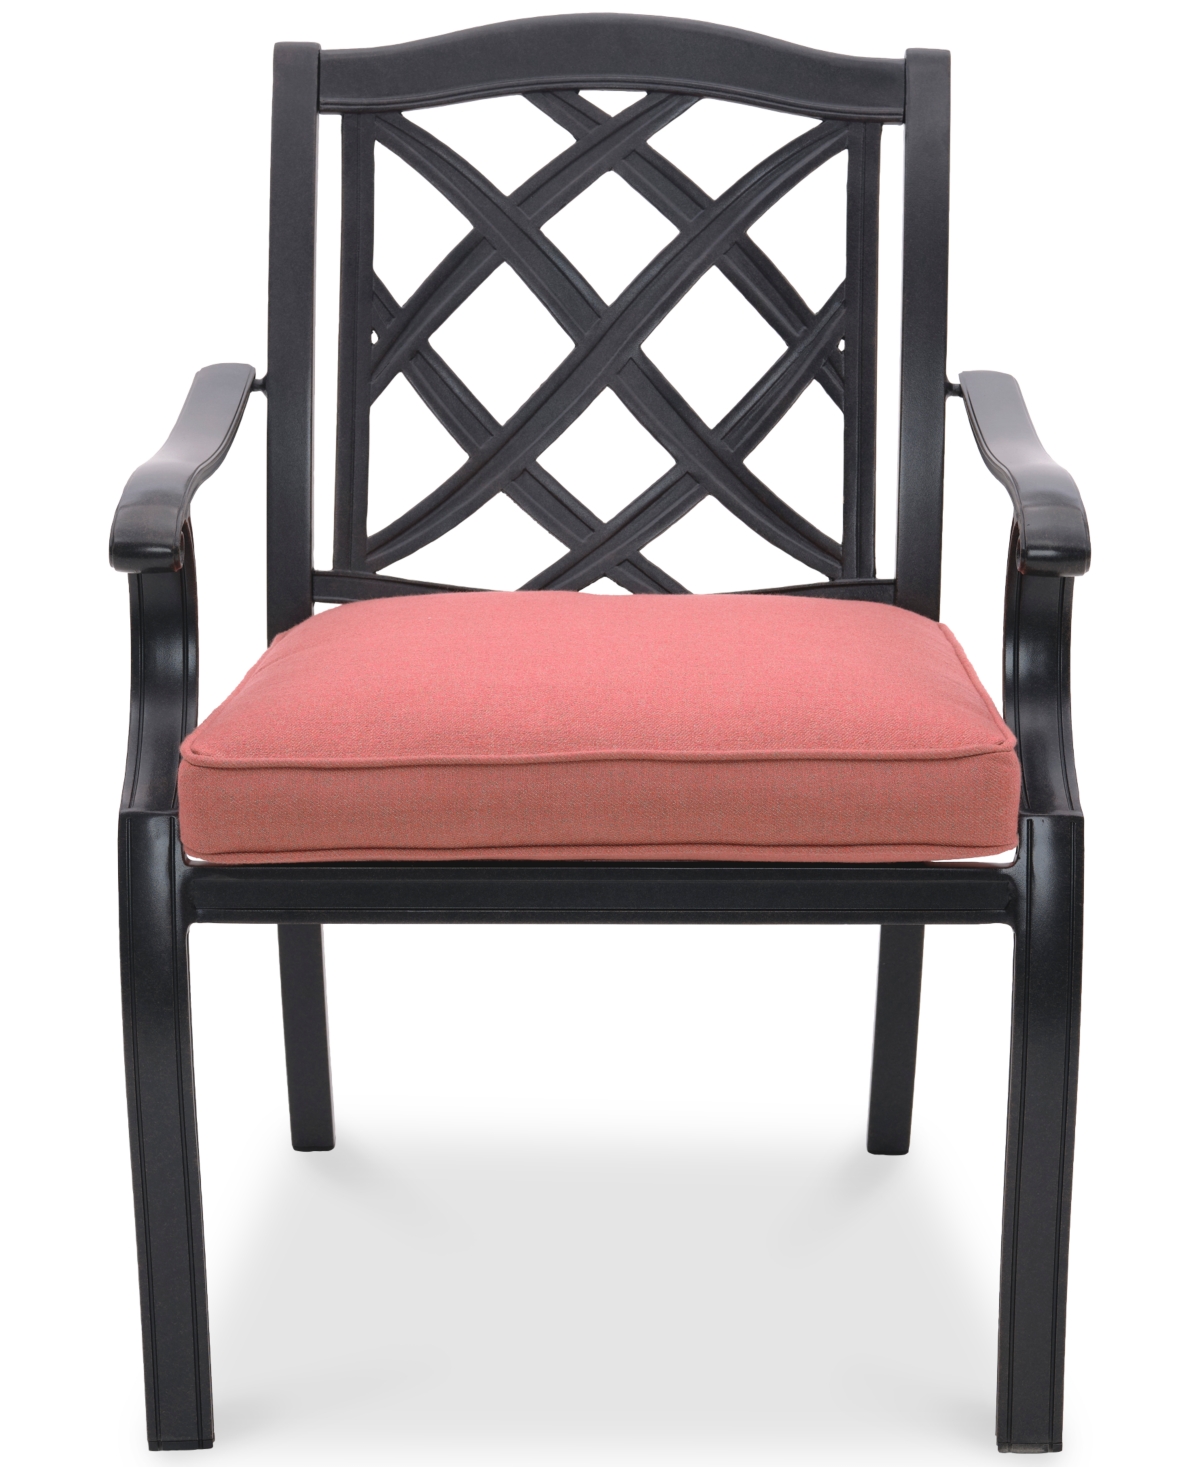 Agio Wythburn Mix And Match Lattice Outdoor Dining Chair In Peony Brick Red,pewter Finish